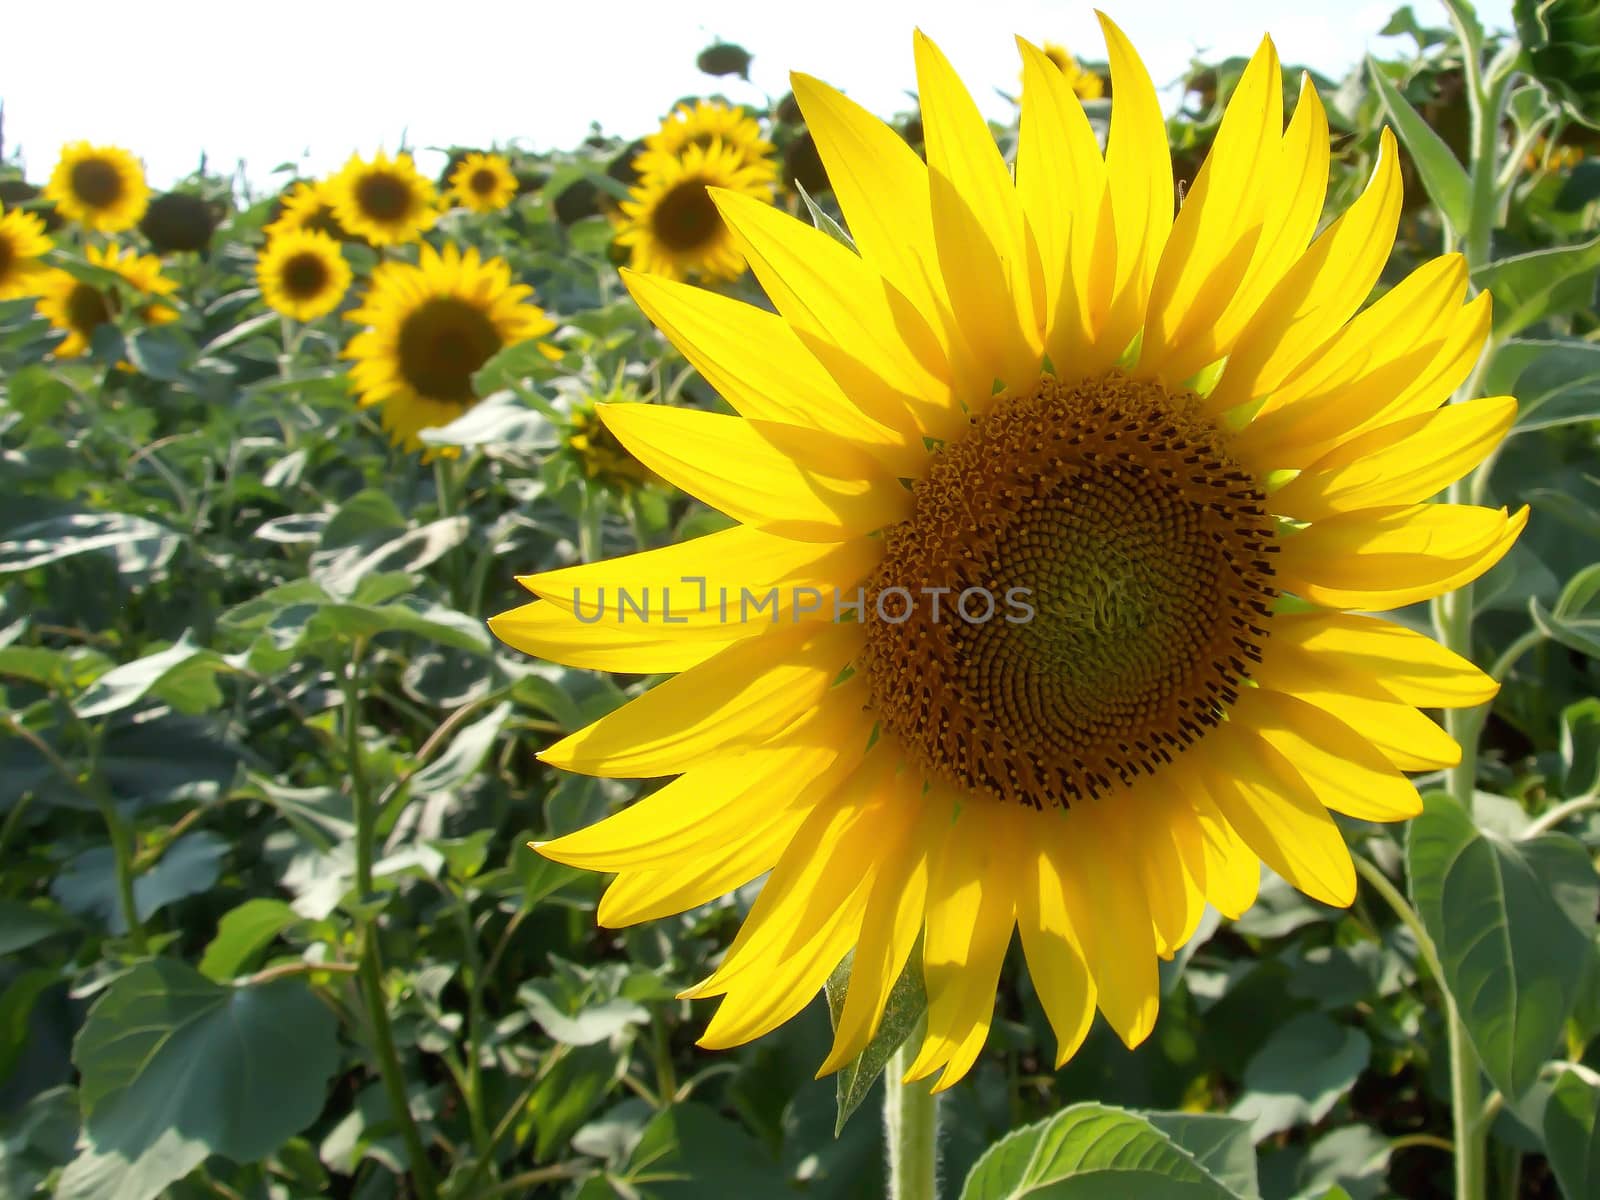 Sunflower by fadeinphotography